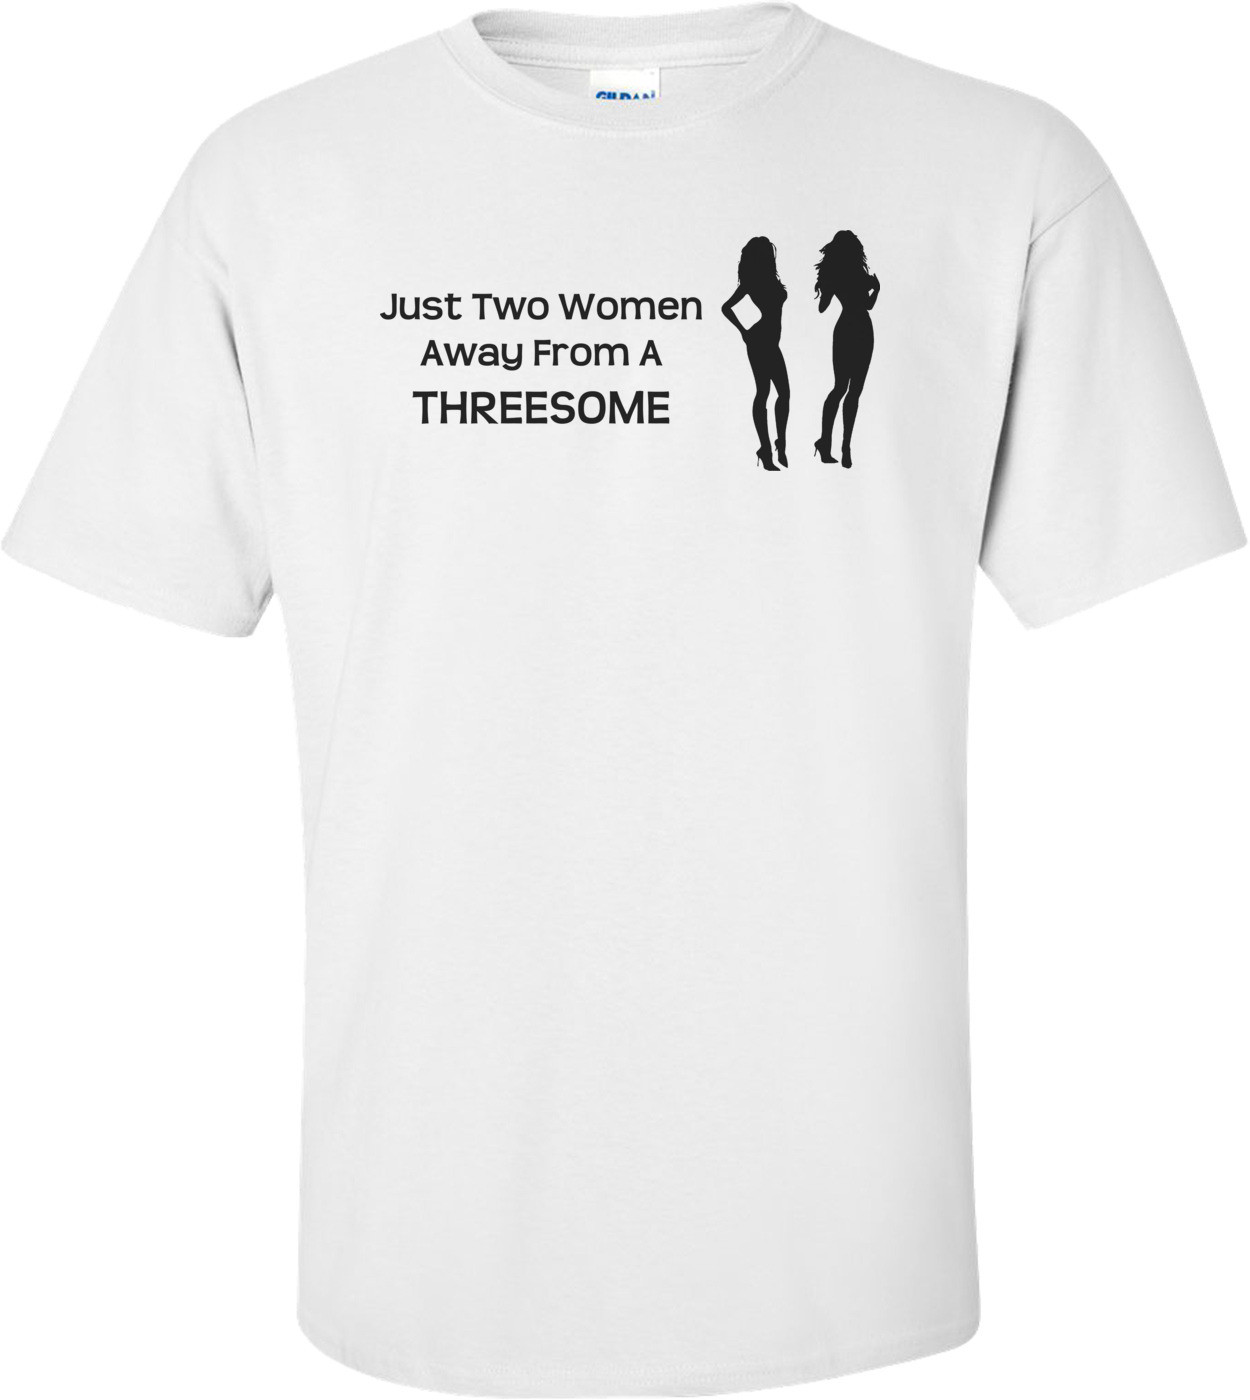 Just Two Women Away From A Threesome T-shirt